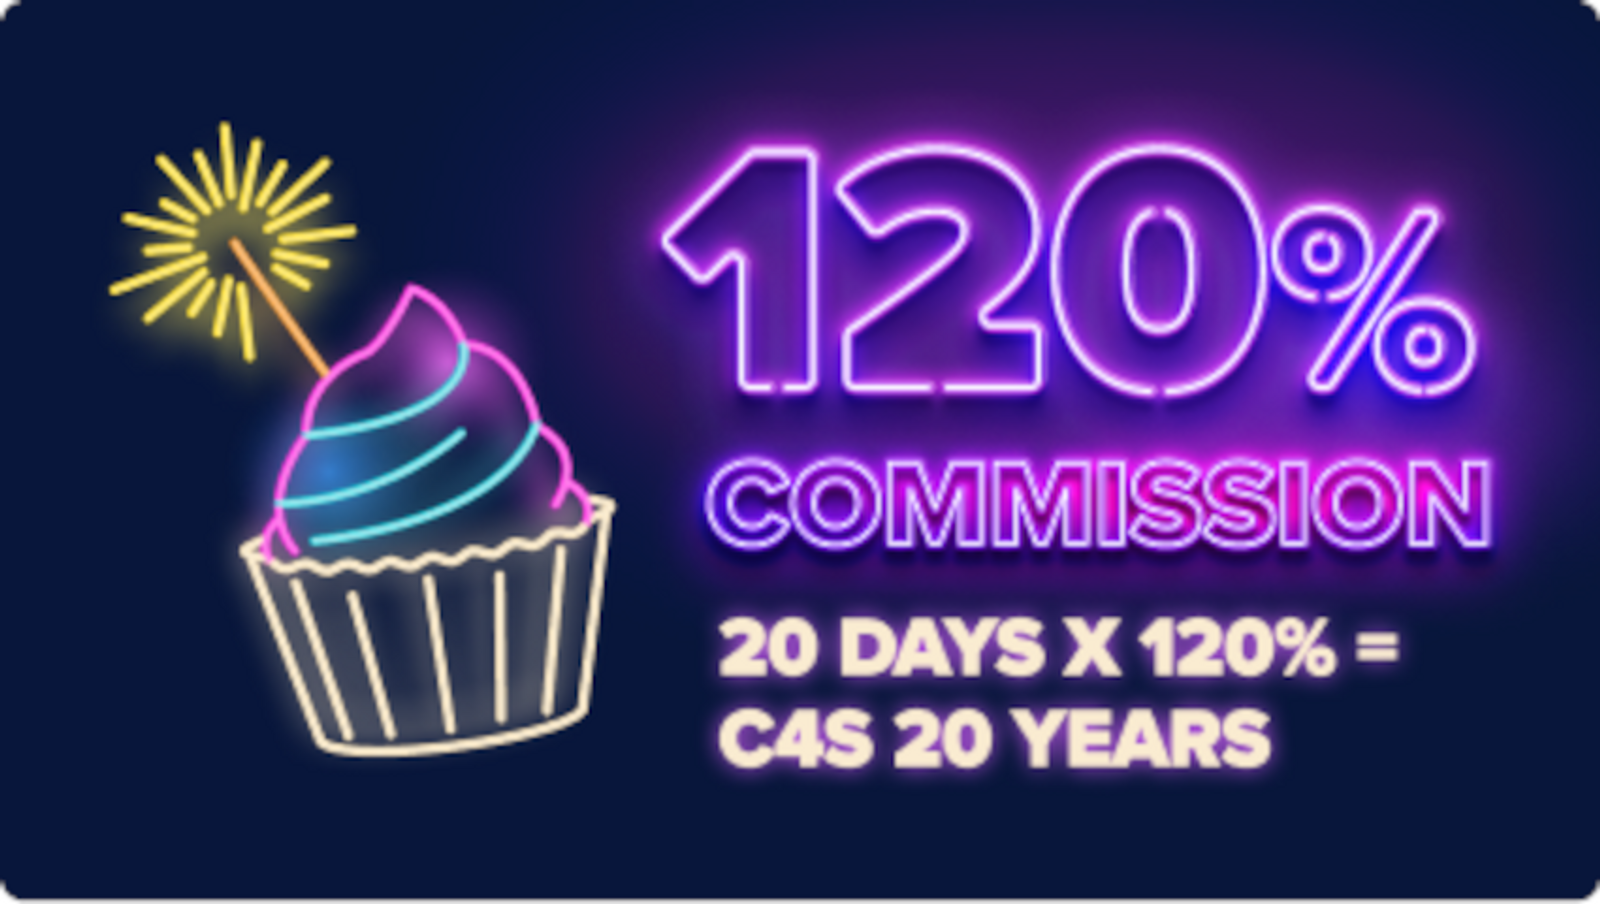 Clips4Sale to Begin 20 Days at 120% Creator Commissions